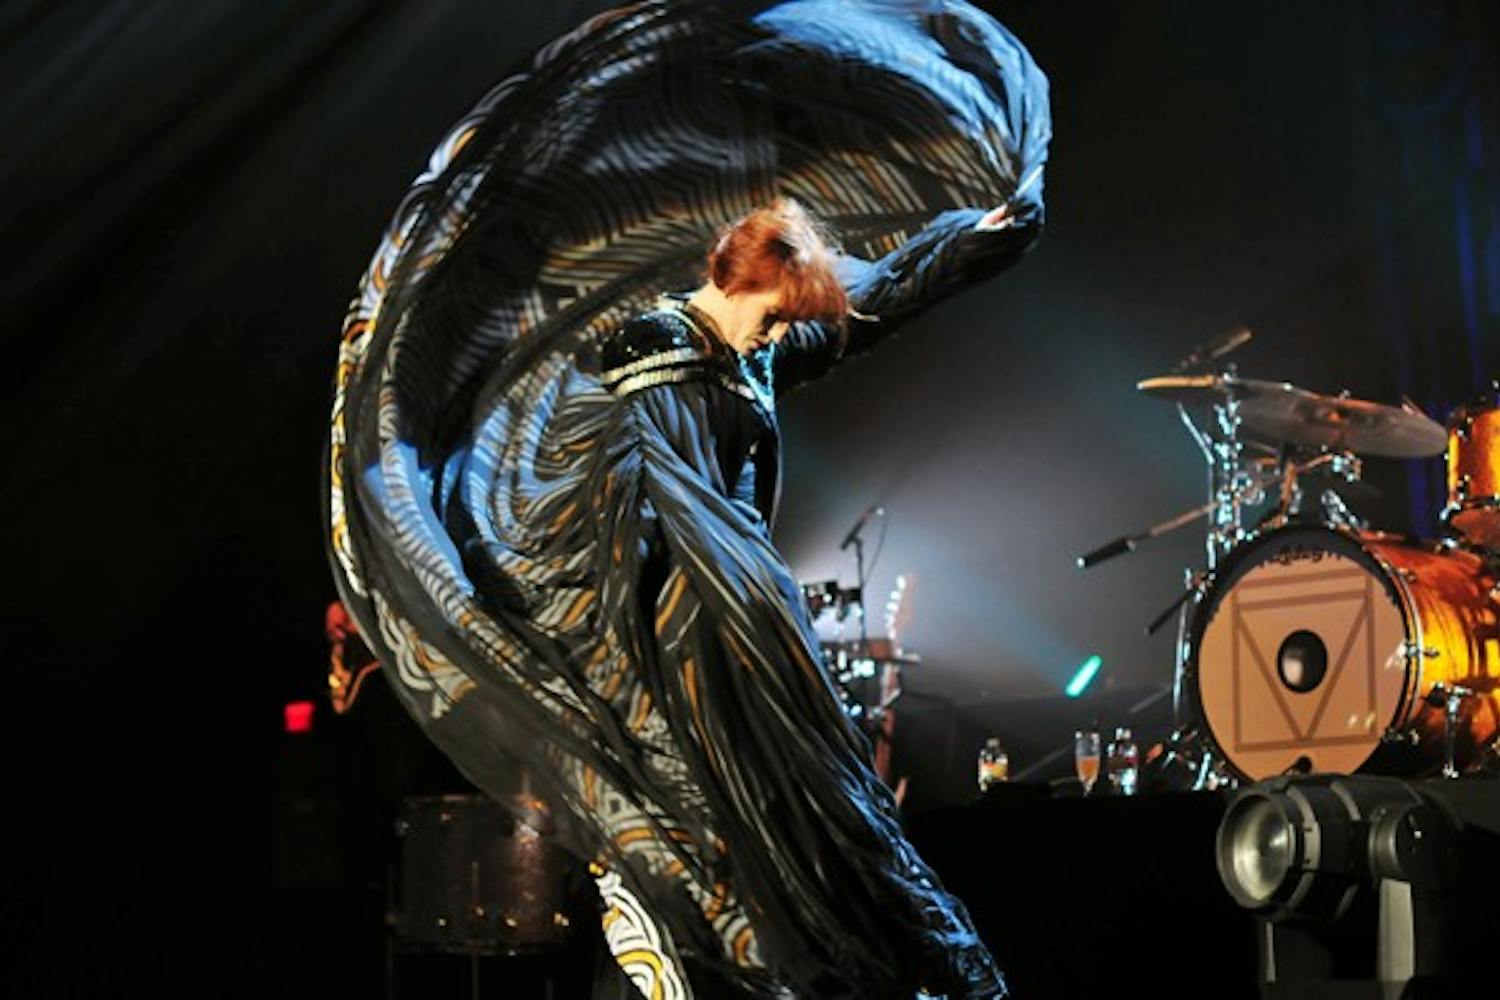 Florence Welch performs on stage at the Comerica Theatre, April 20, 2012. (Photo by Cheman Cuan)